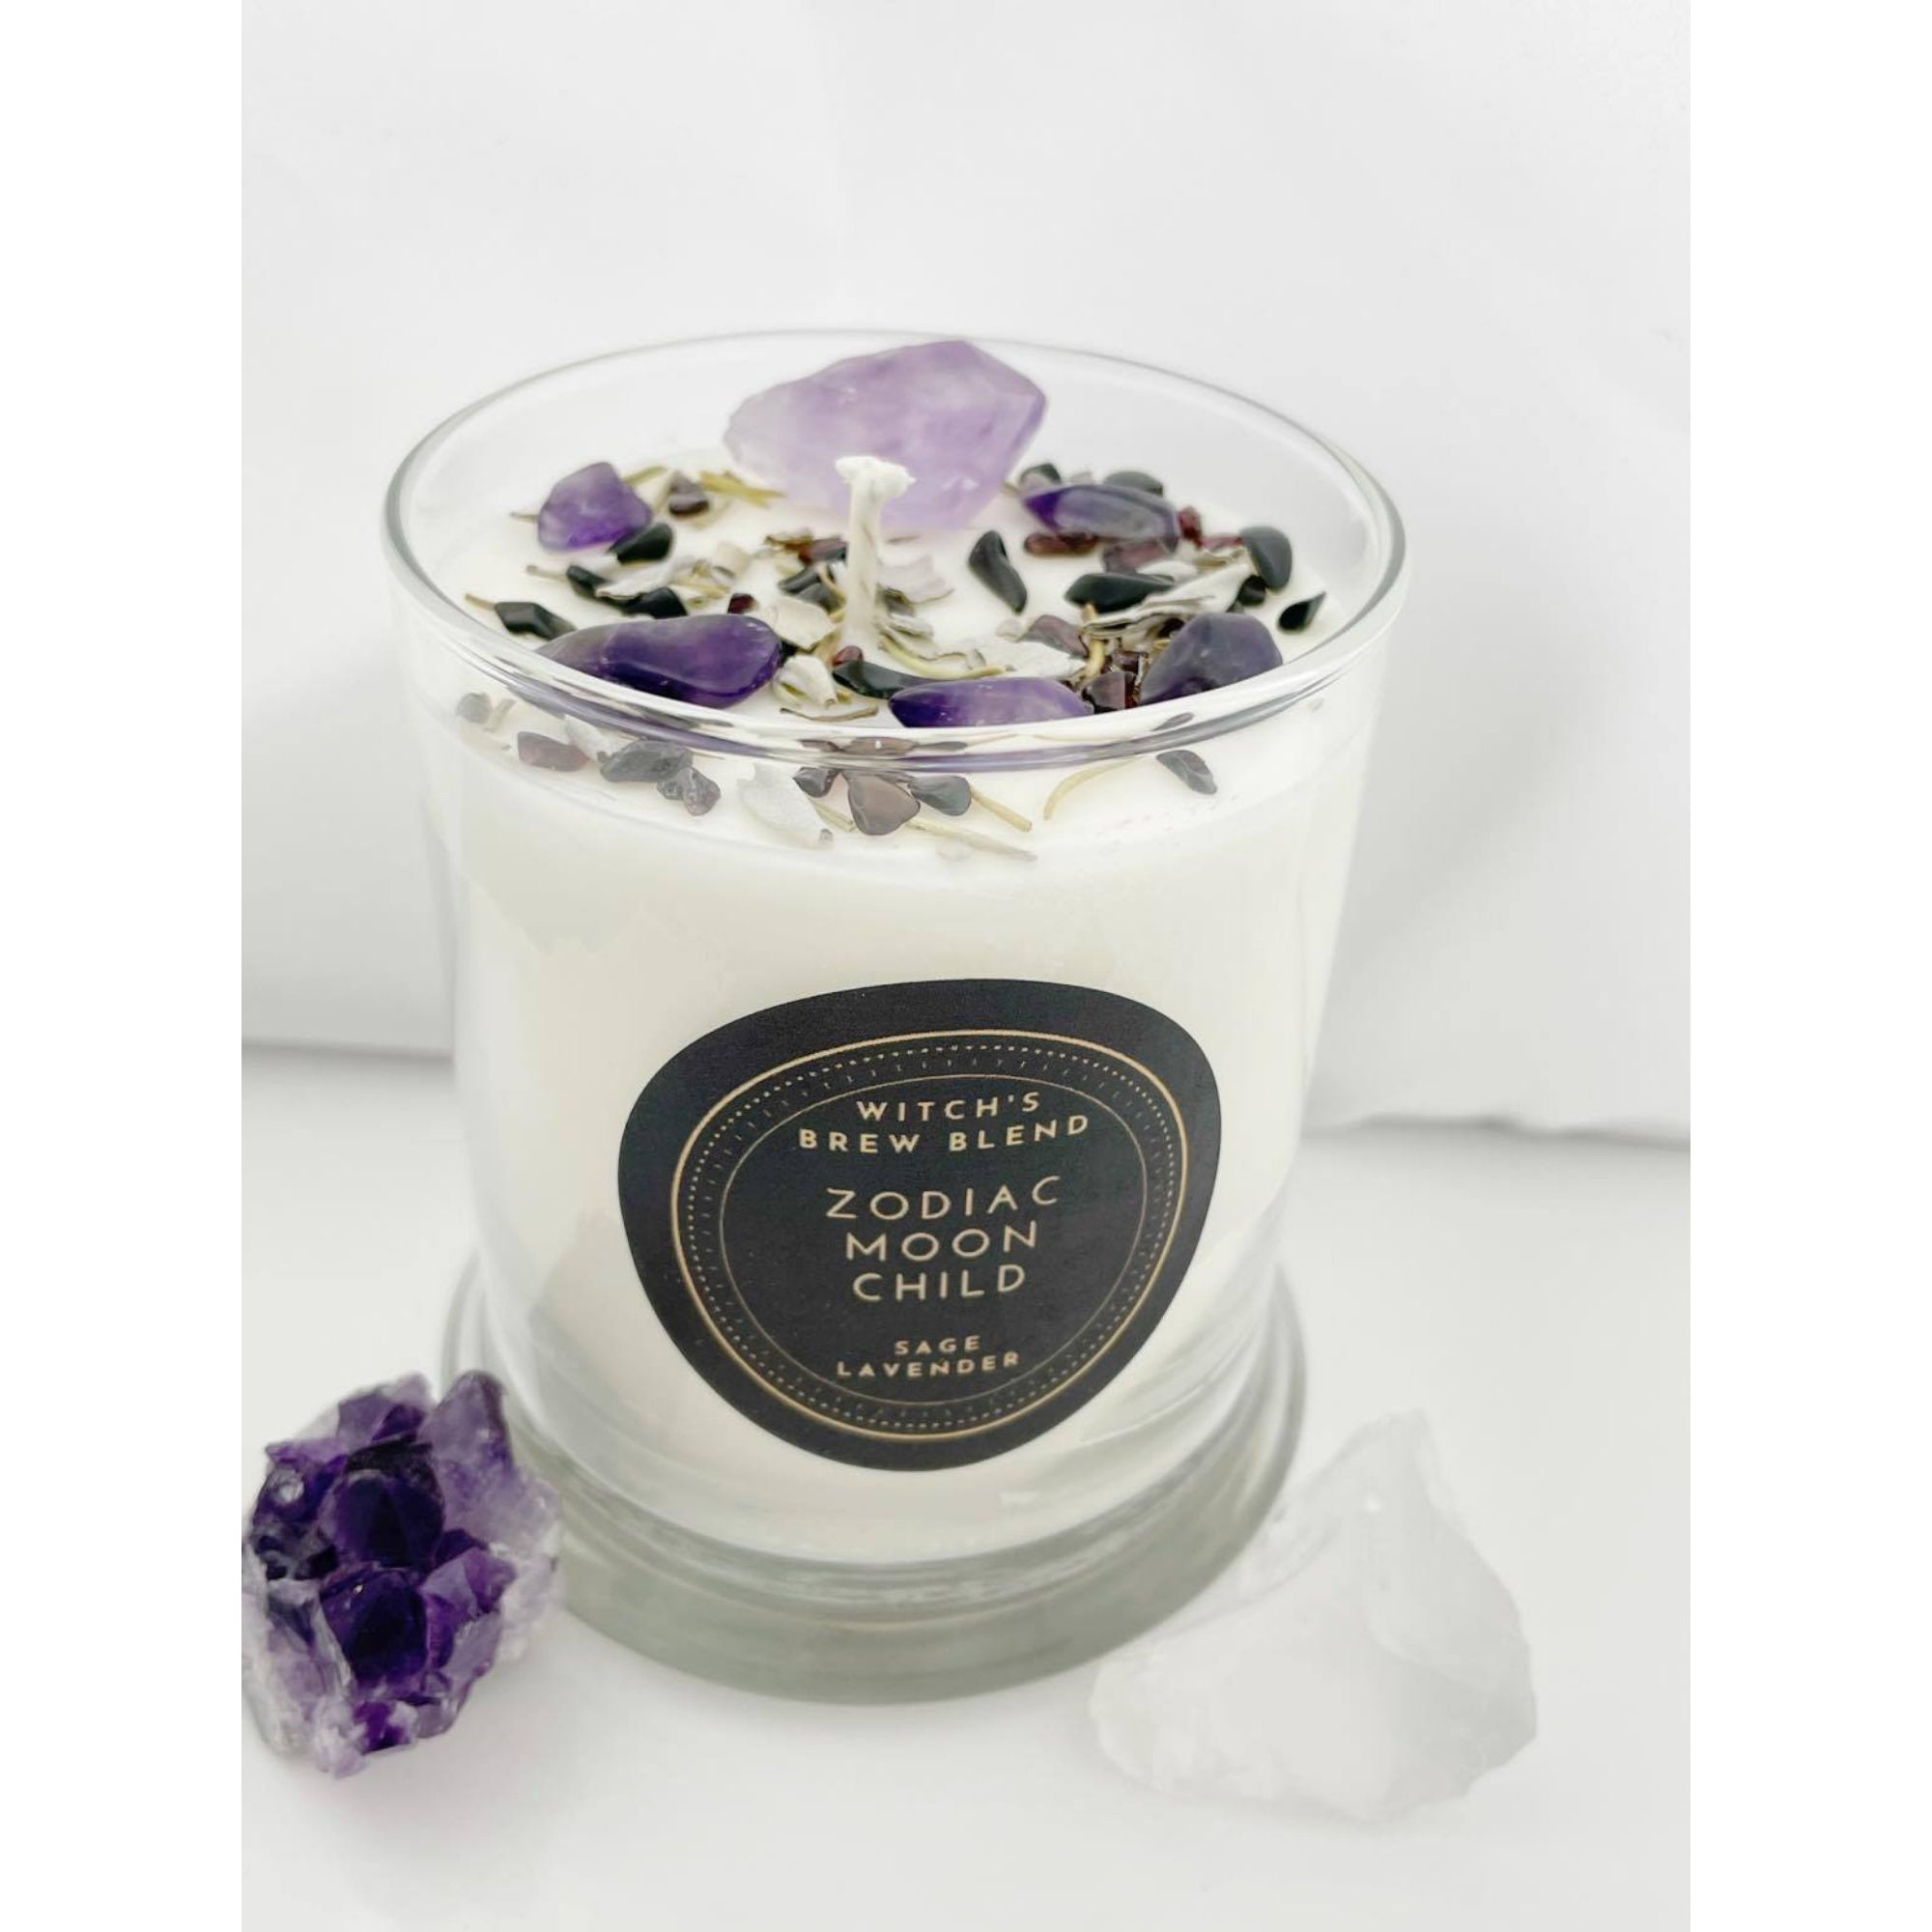 Witch's Brew Blend Crystal Candle - Lavender & White Sage Spiritual Collection Herb 100% Natural Soy Wax